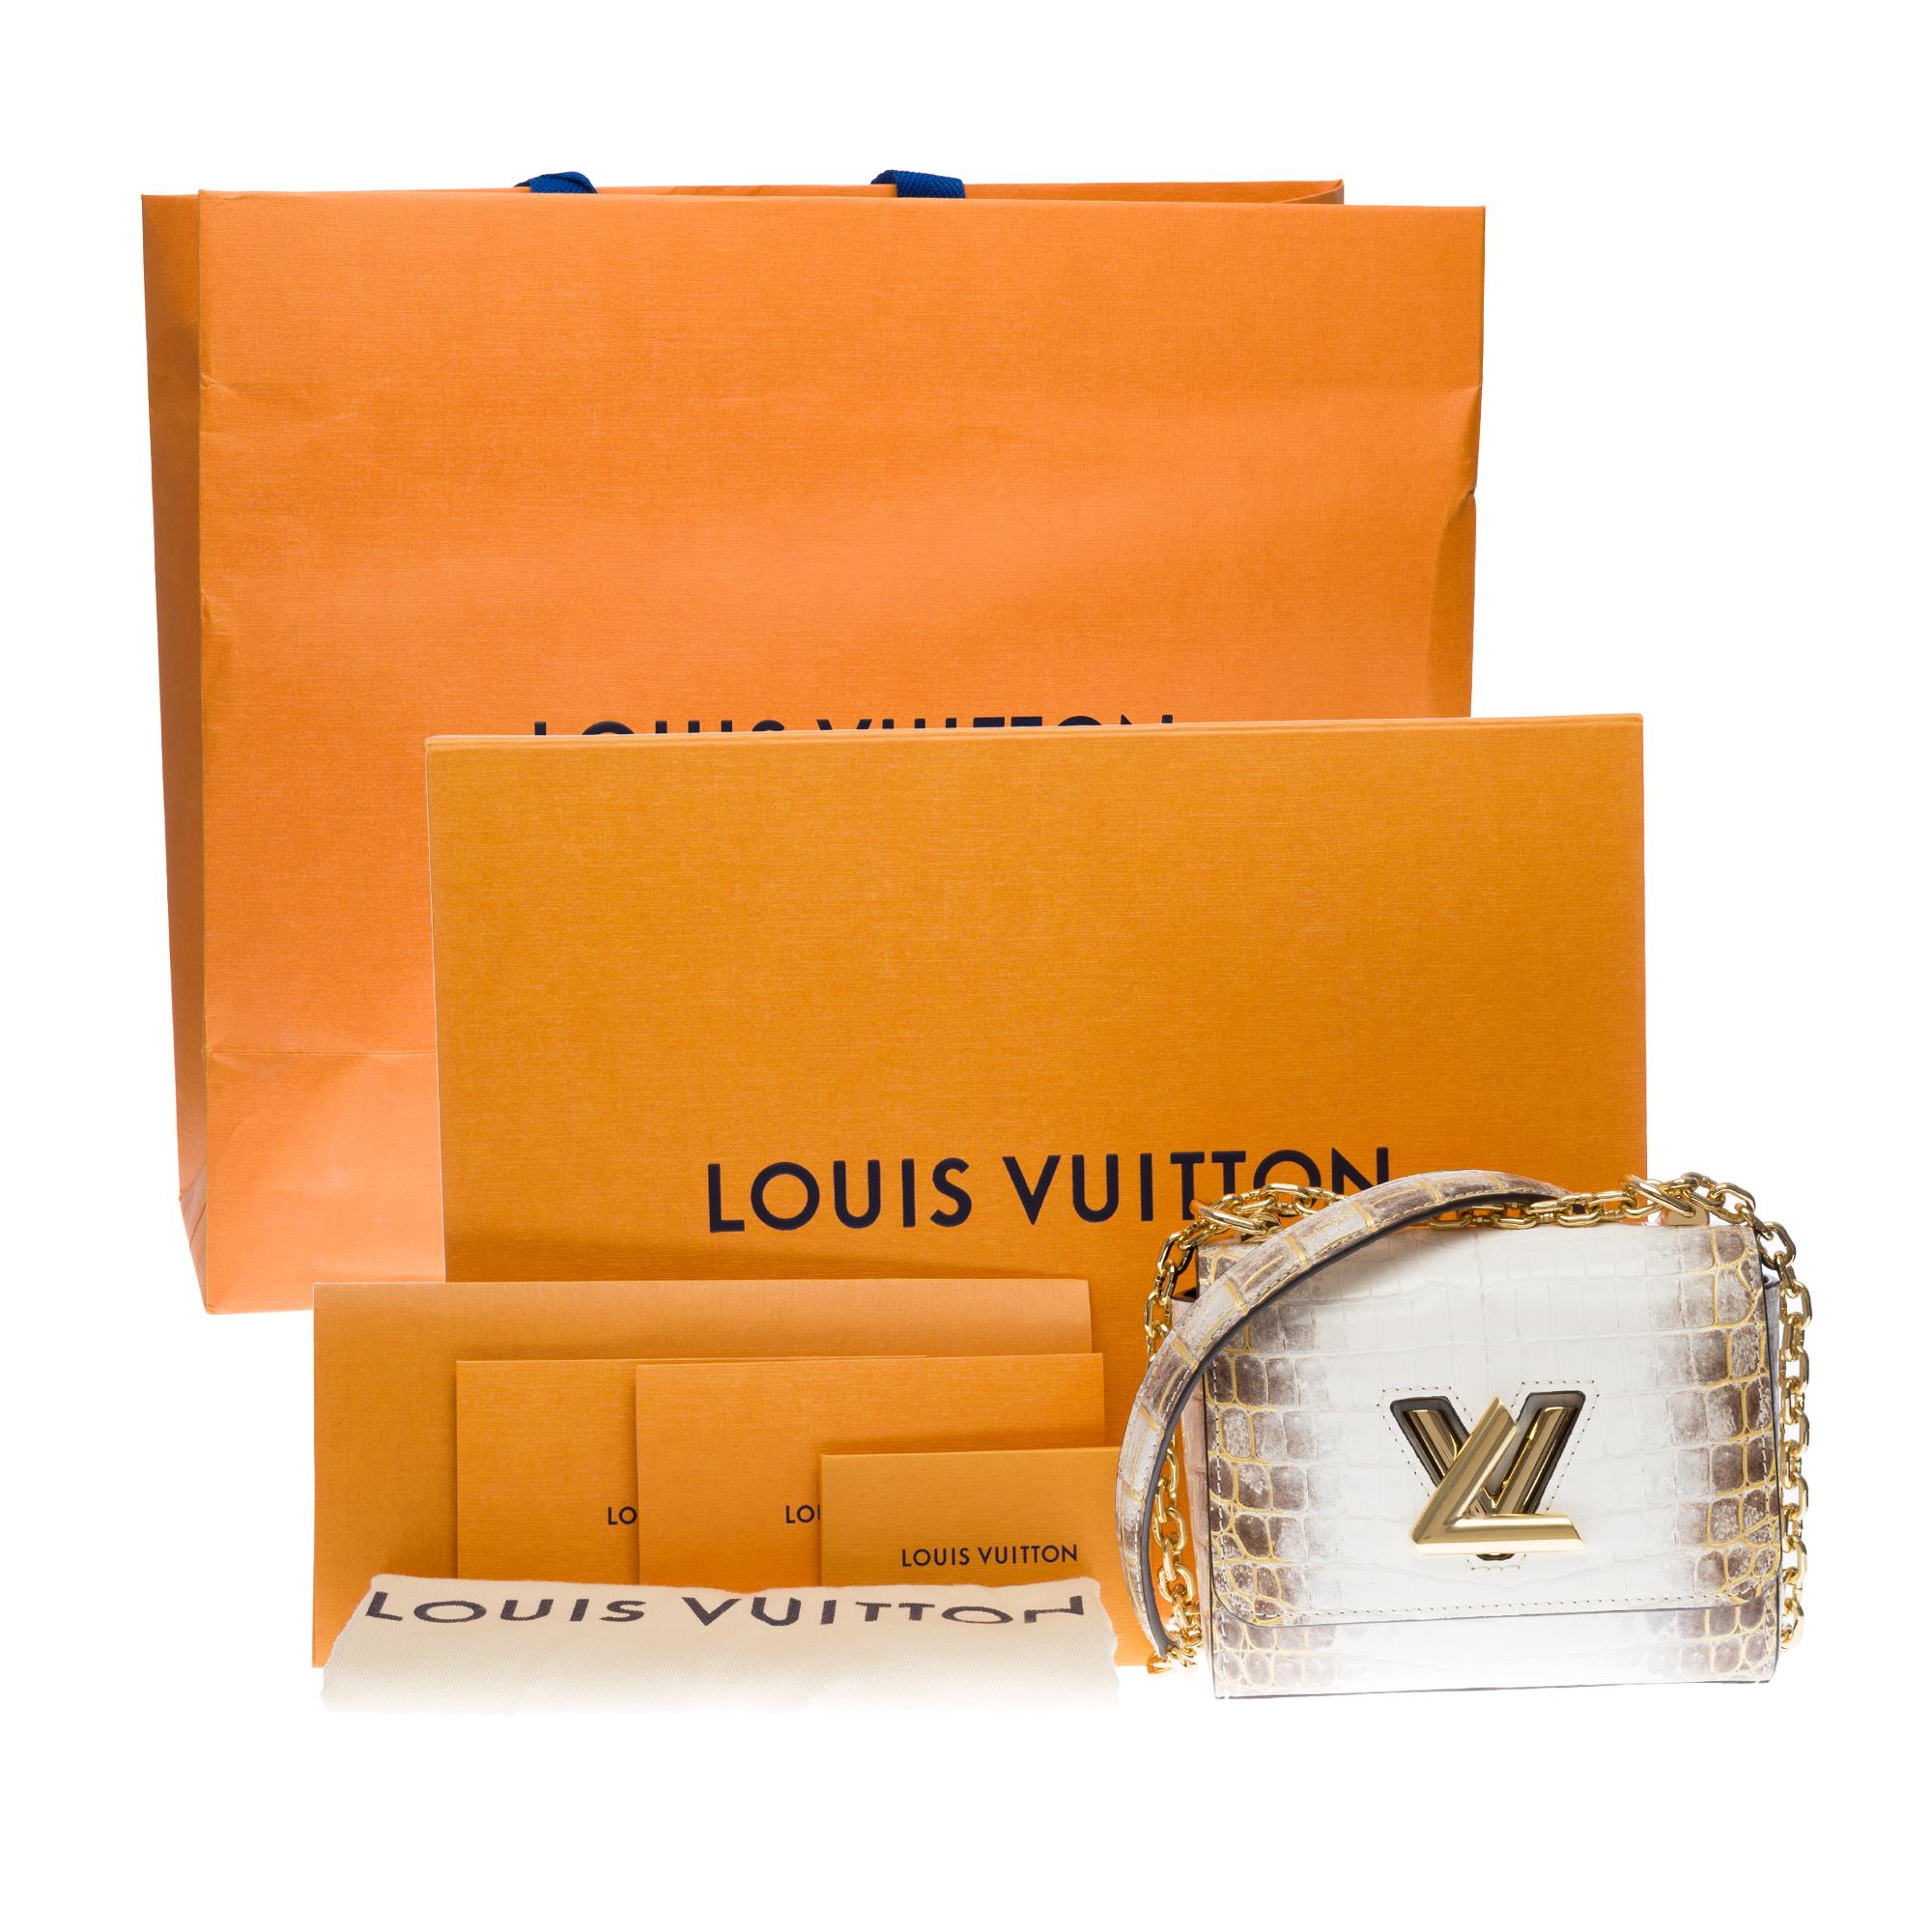 NEW Louis Vuitton Mini Twist shoulder bag in White Crocodile leather and GHW 6